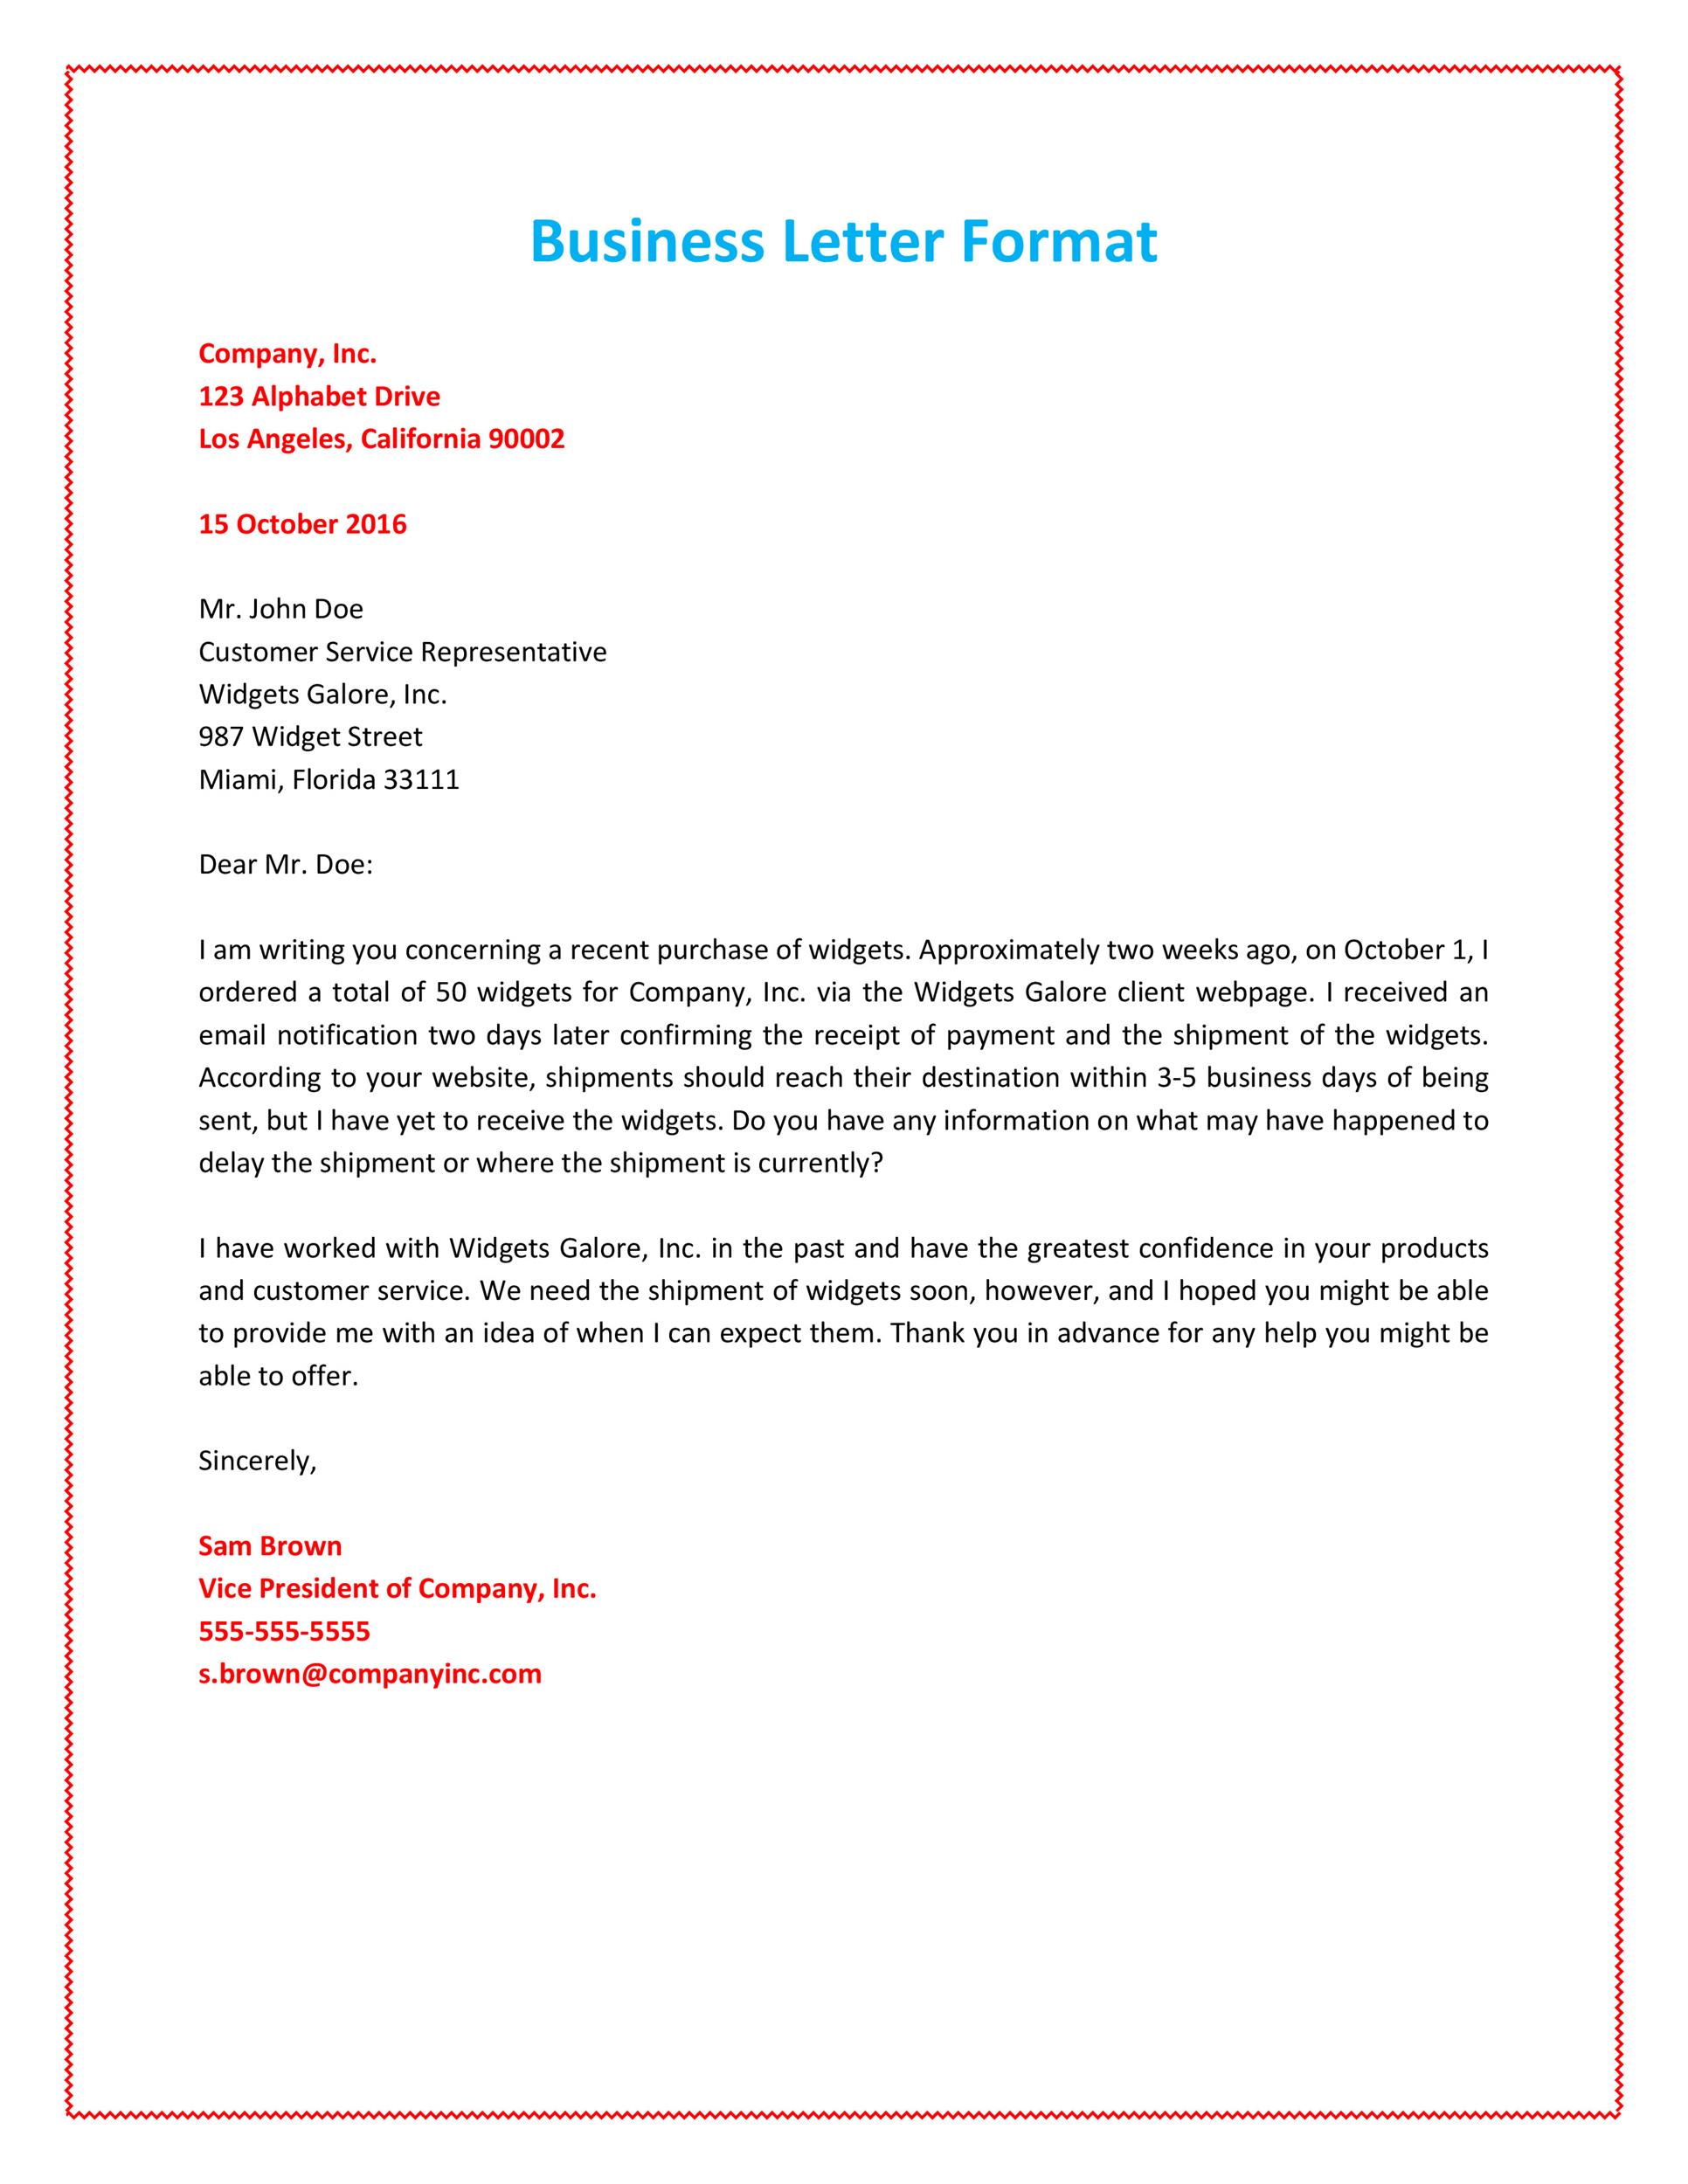 Business Letter Template - FREE DOWNLOAD - Aashe